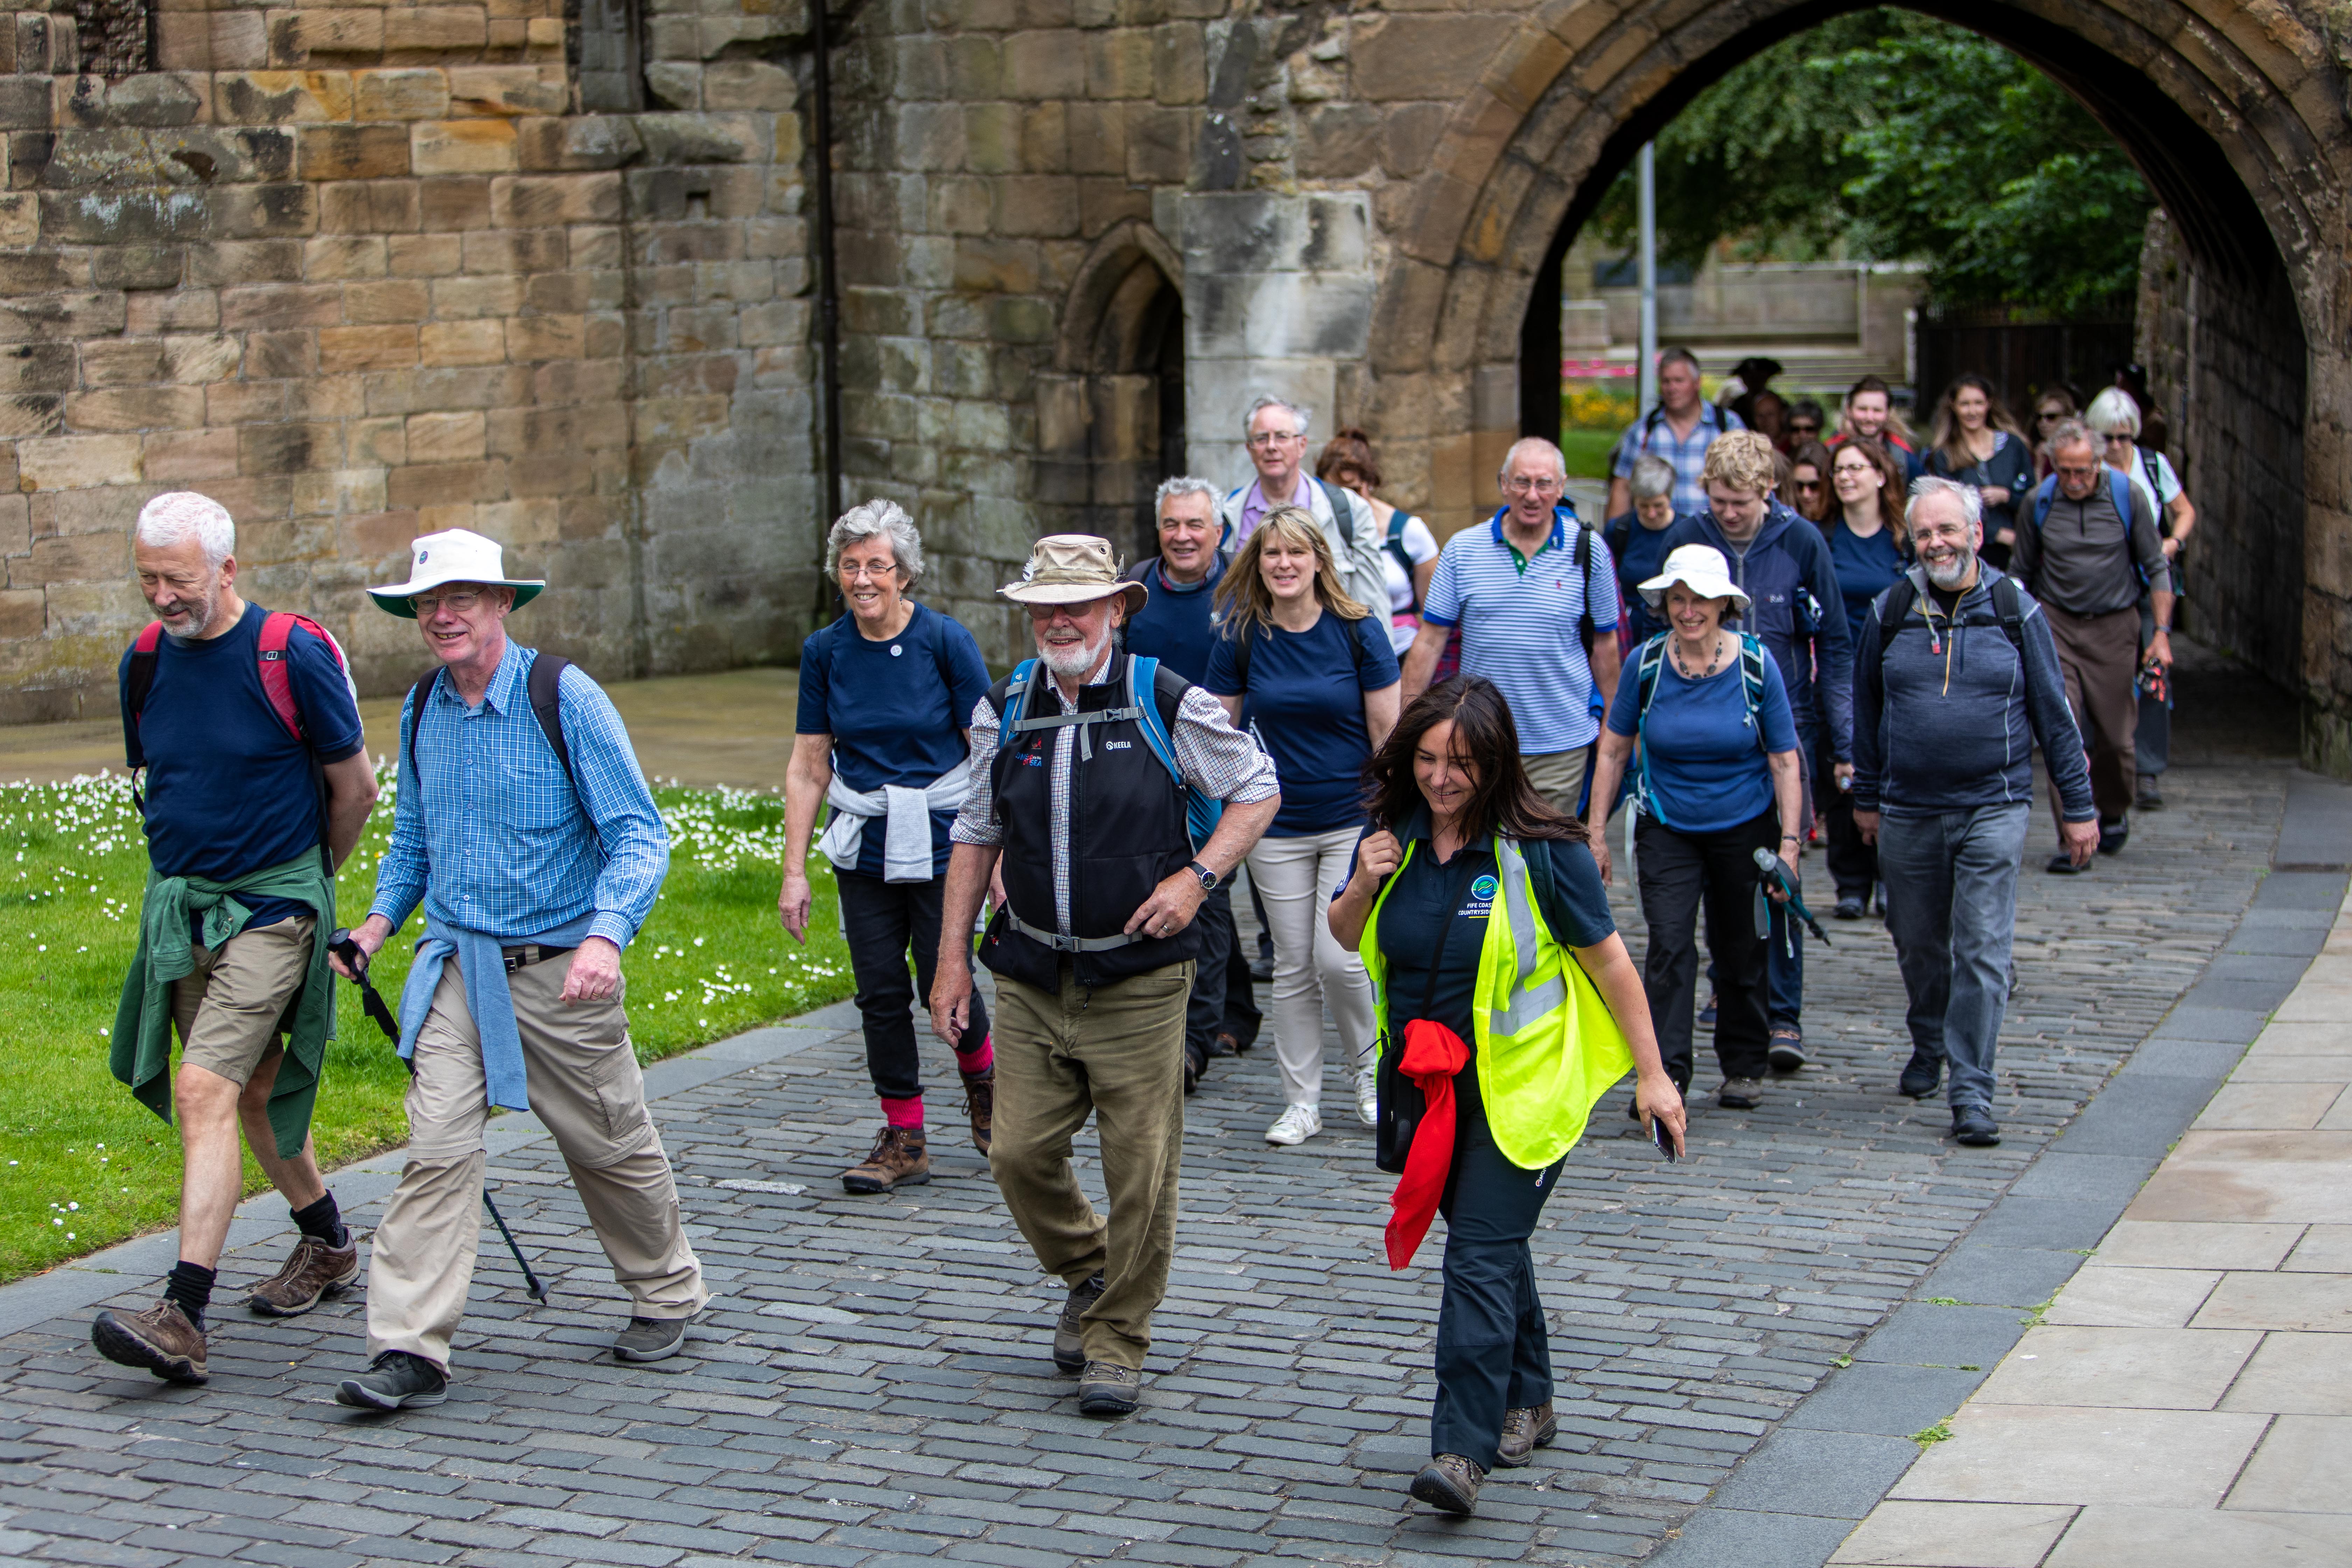 Walkers make their way on a special 8.5-mile section of the Pilgrim Way as part of the official opening day. Some donned costumes to mark to occasion.